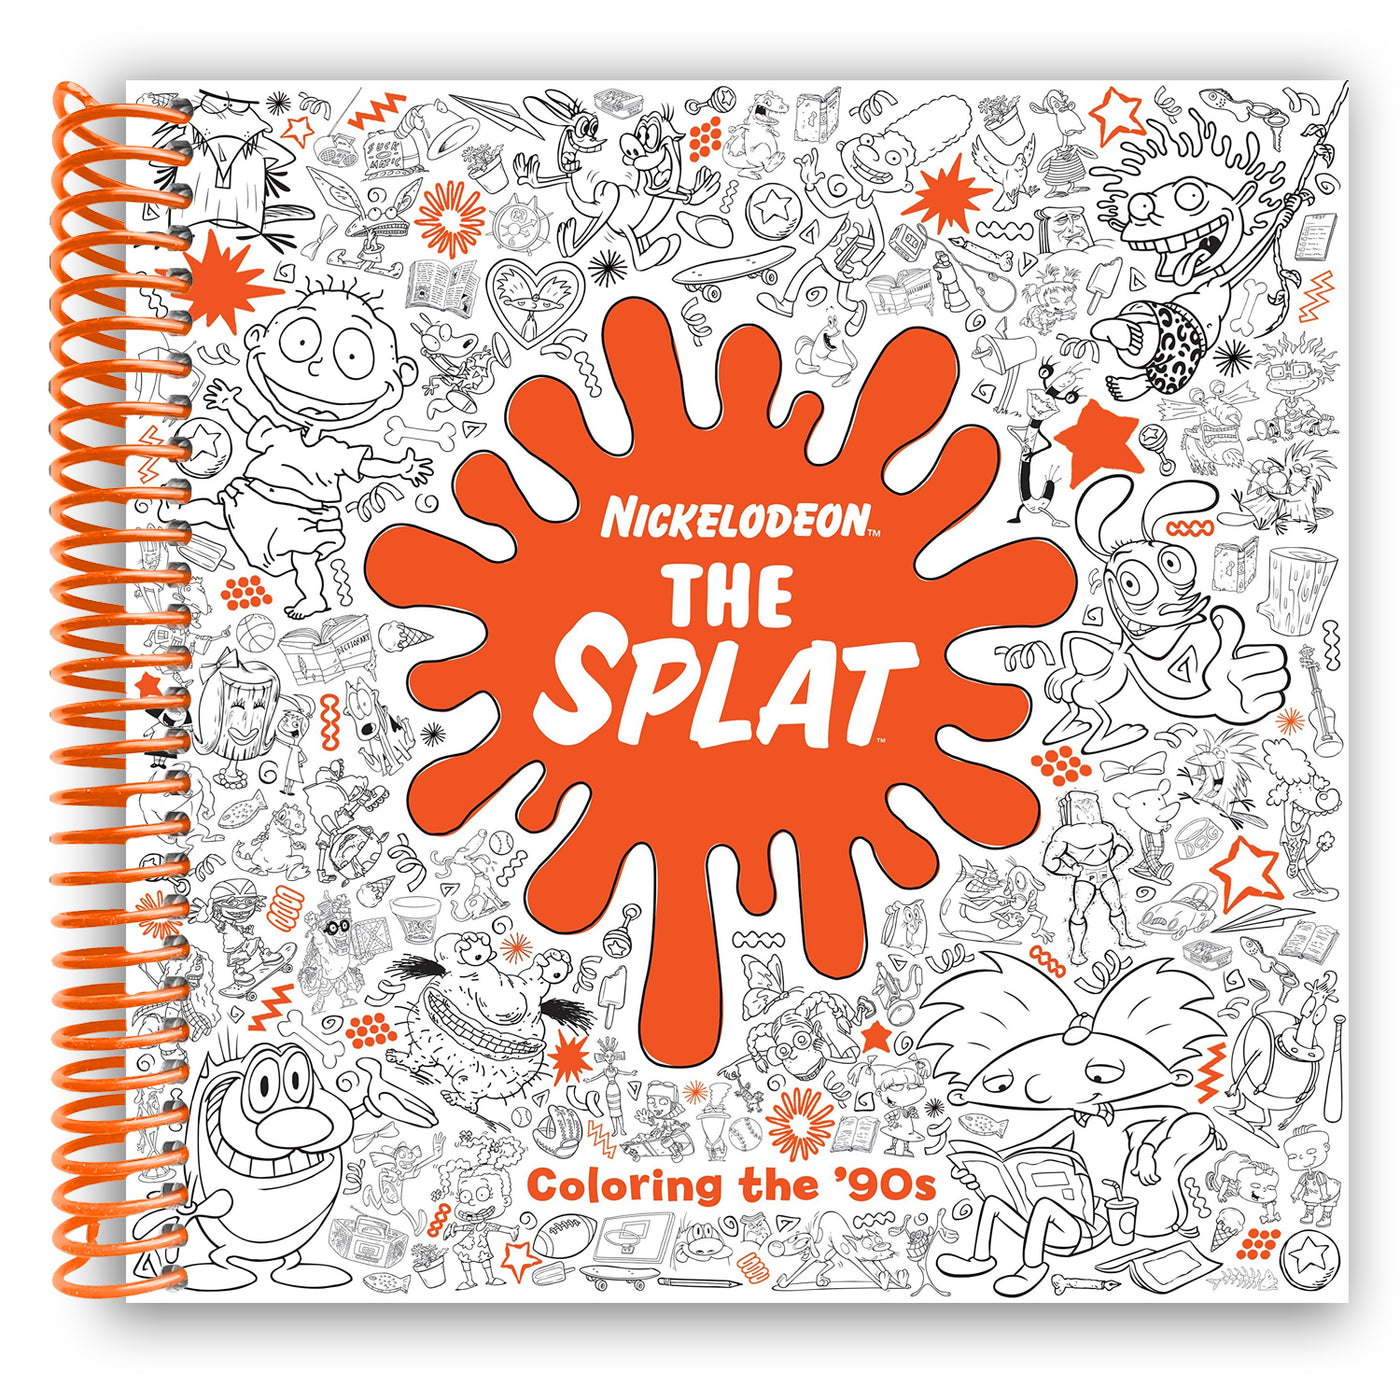 The Splat: Coloring the '90s (Nickelodeon) (Adult Coloring Book) (Spiral Bound)